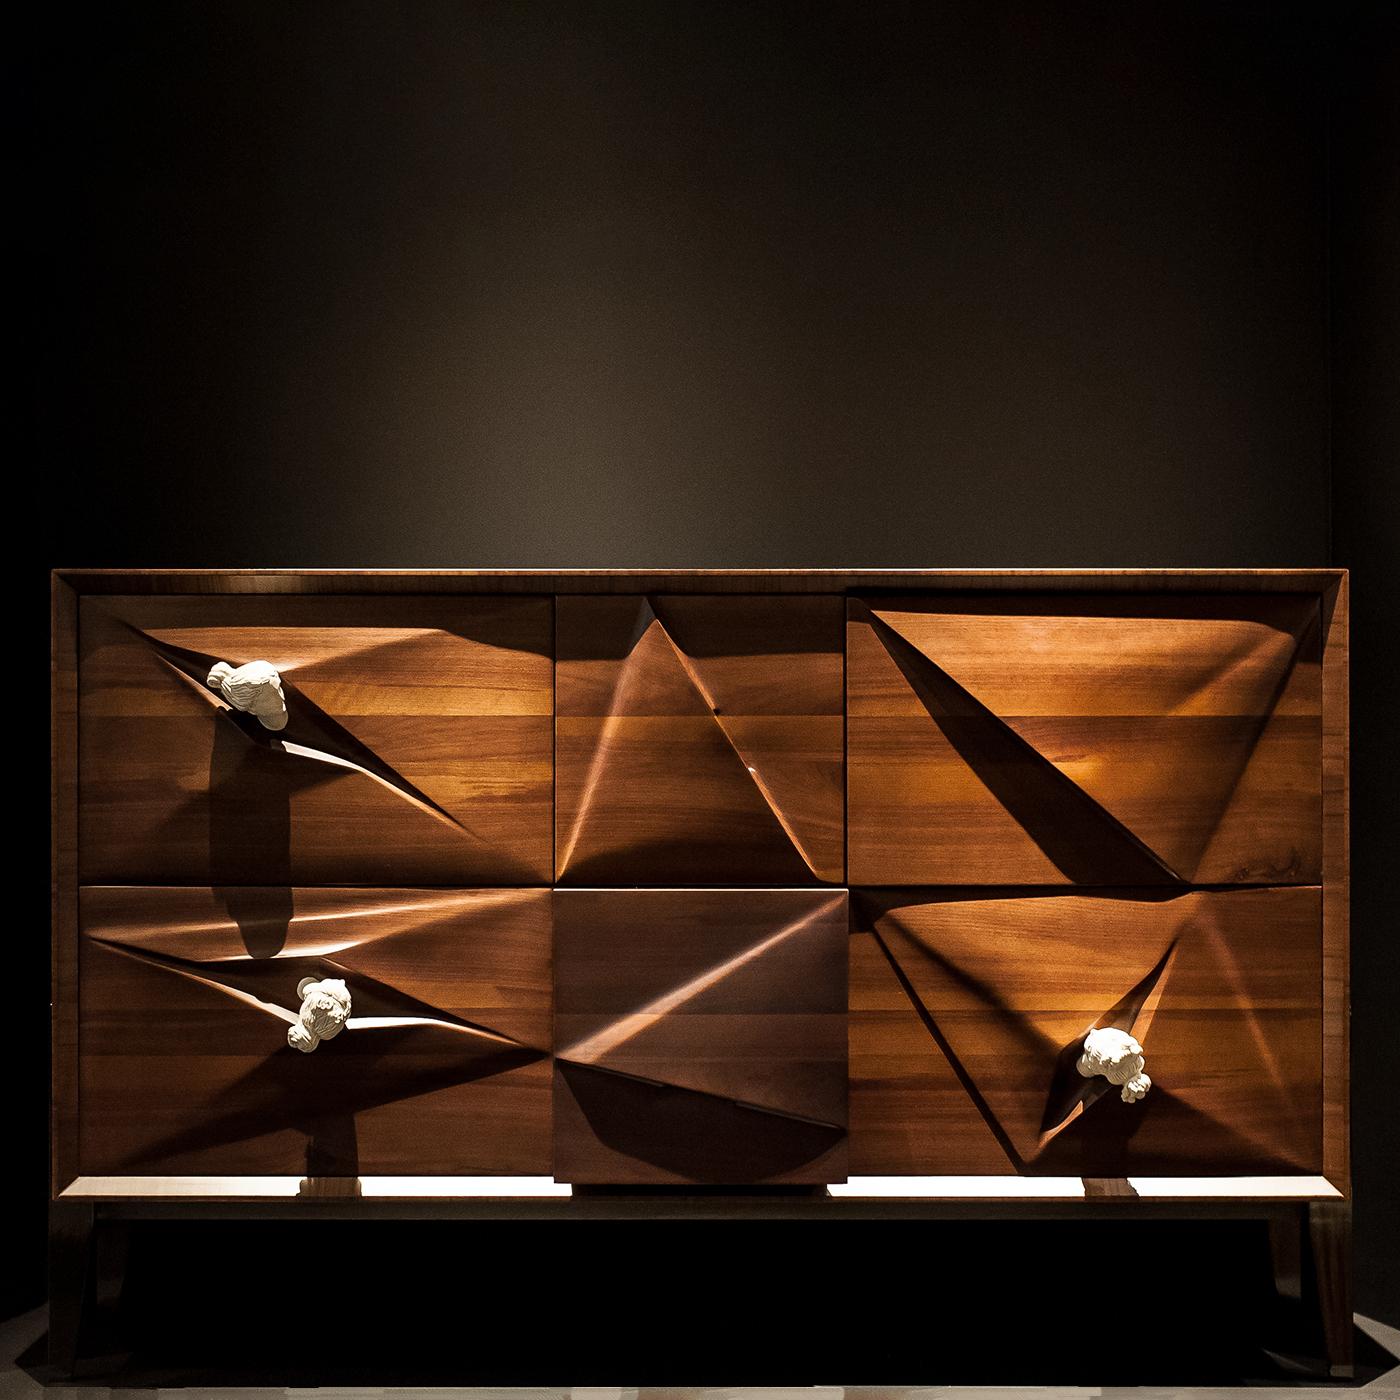 21st Century Ca Nova Sideboard, Walnut and Porcelain, Made in Italy by Hebanon In New Condition For Sale In Nocera Superiore, Campania